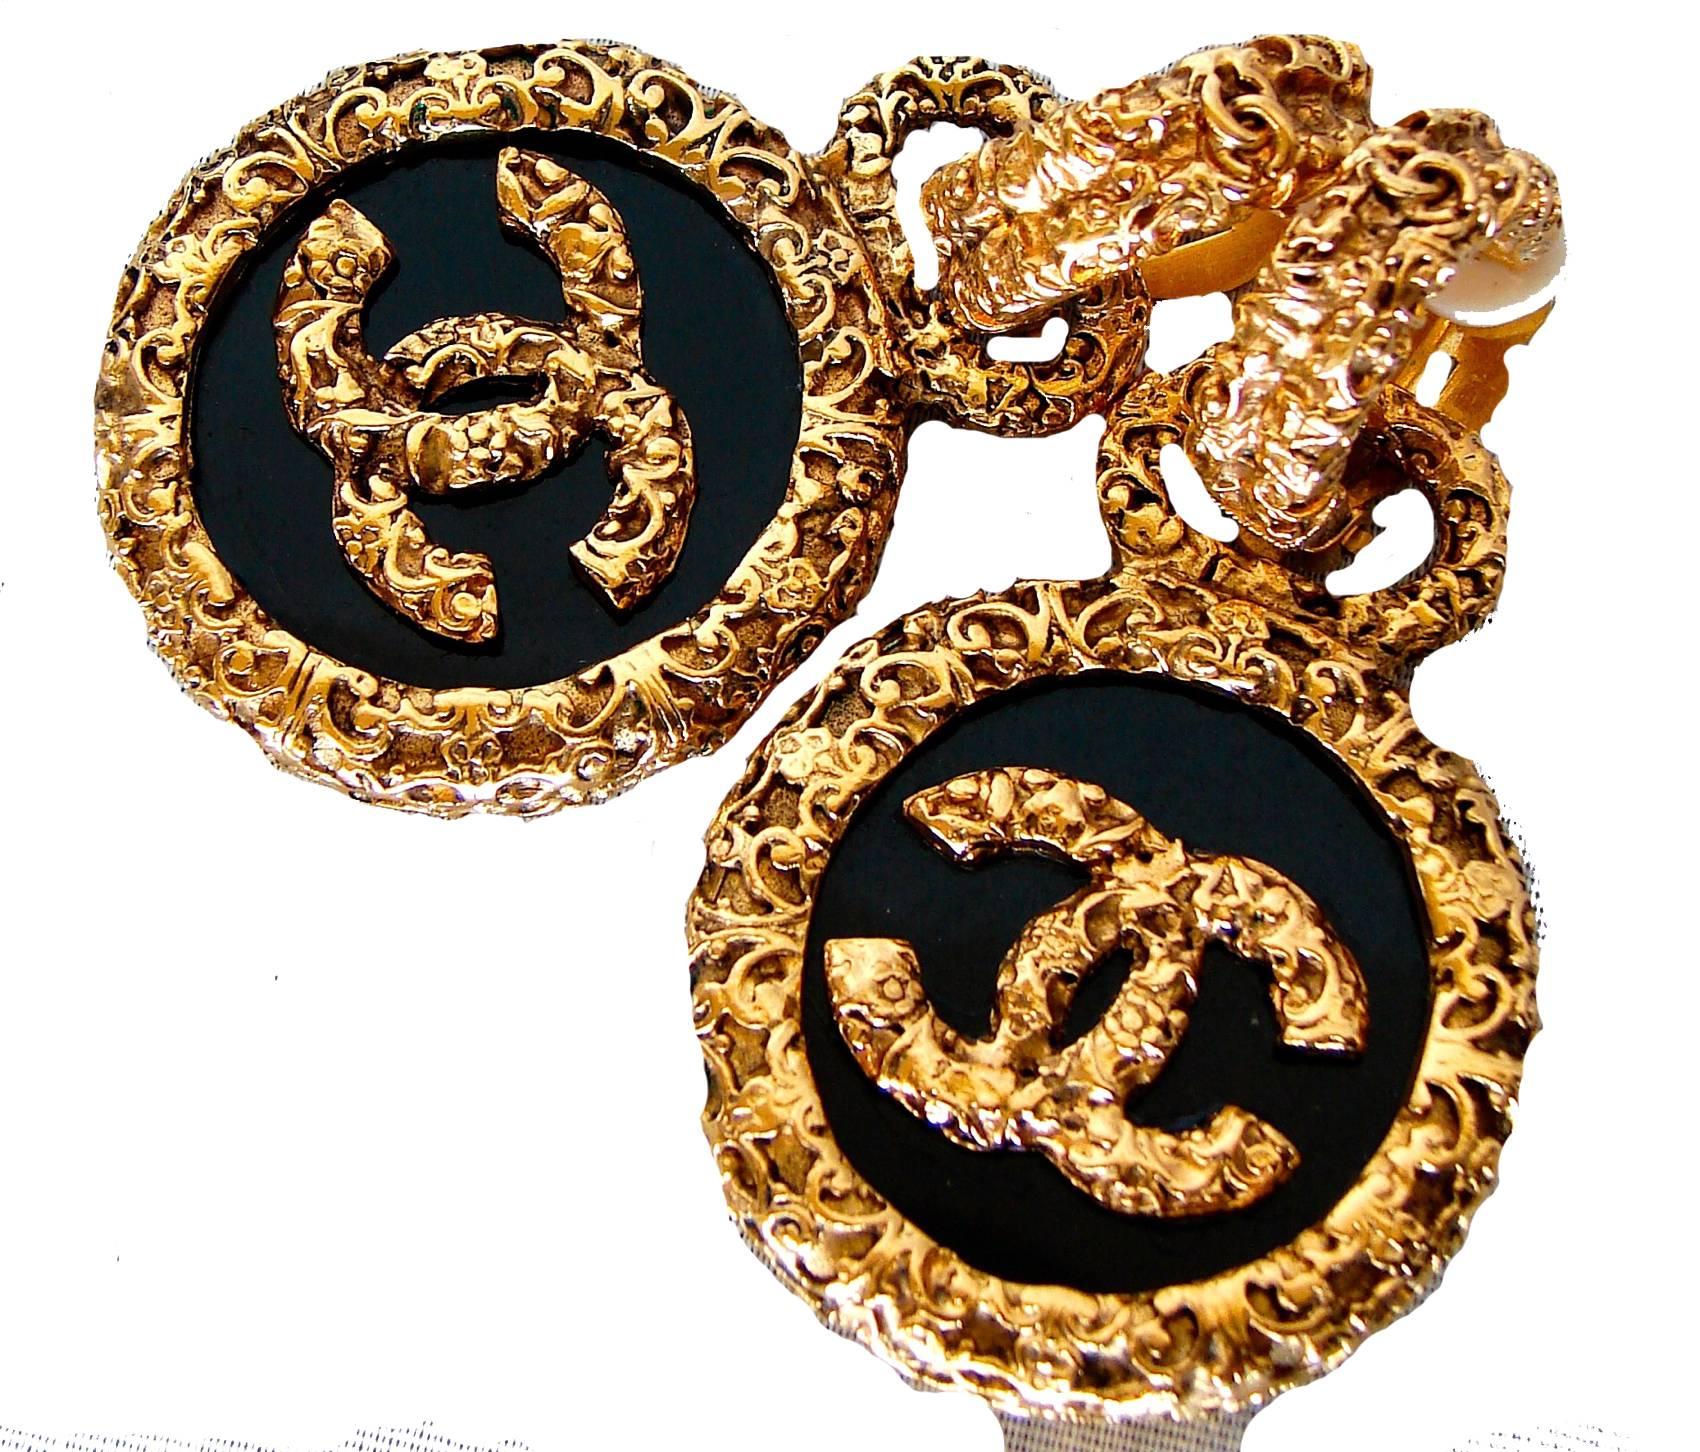 These impressive earrings were designed by Victoire de Castellane for Chanel as part of the 93A collection.  Each earring features two pieces: a gild metal clip earring with a tiny CC logo and a large gilt-trimmed black medallion with the iconic CC